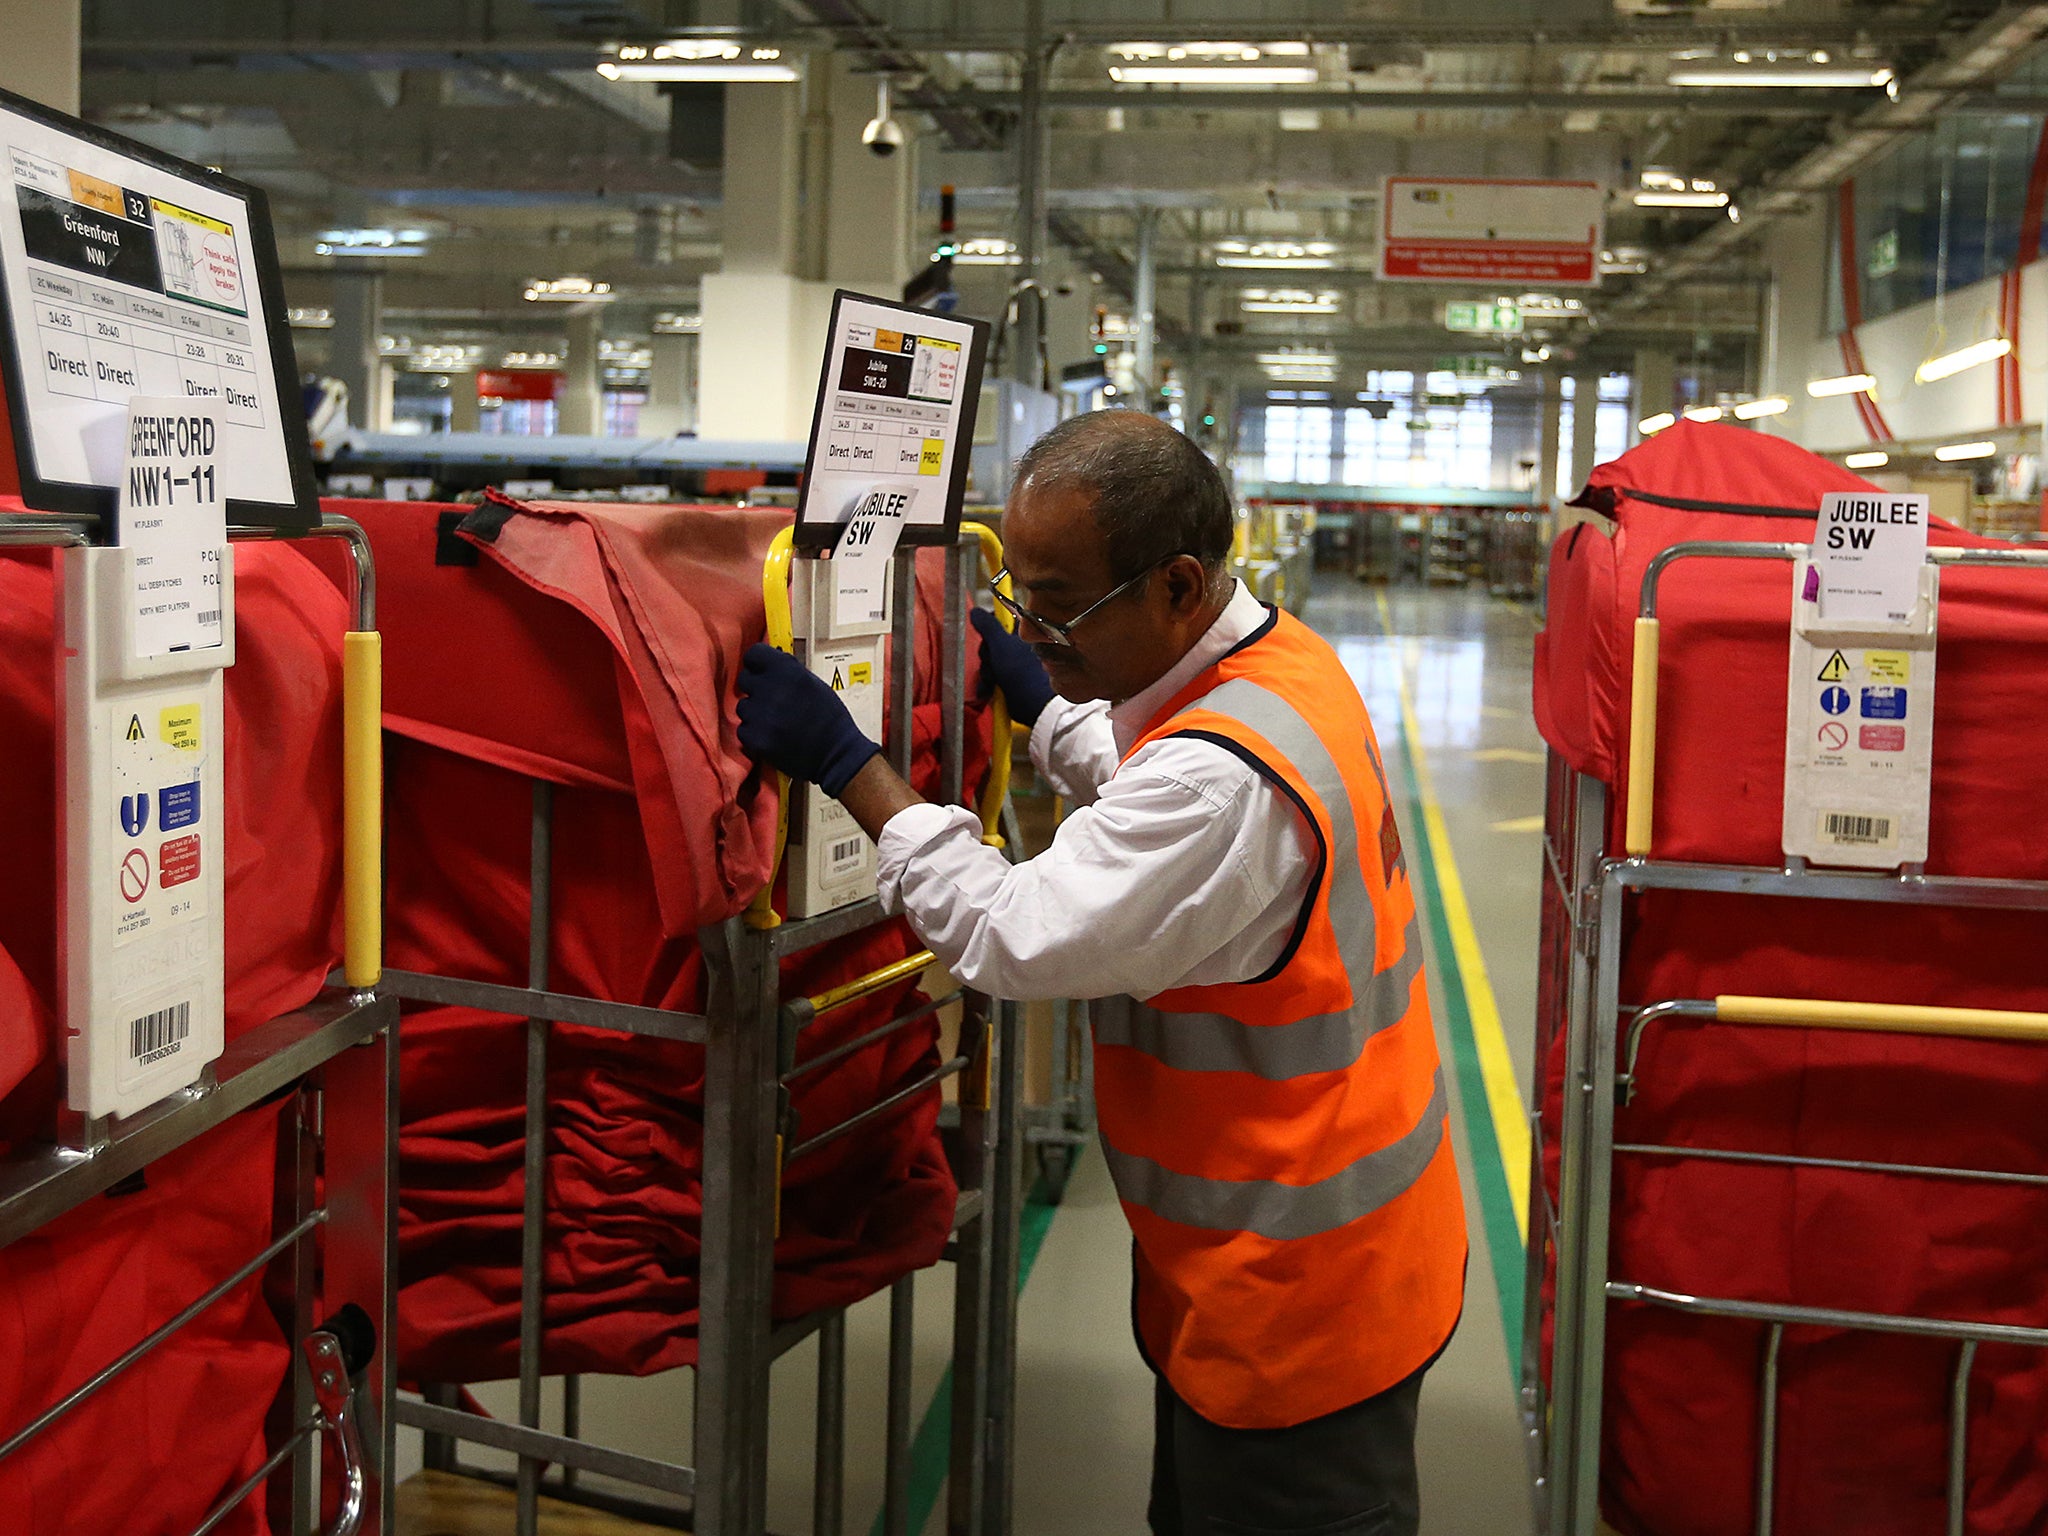 Royal Mail workers have voted to take strike action